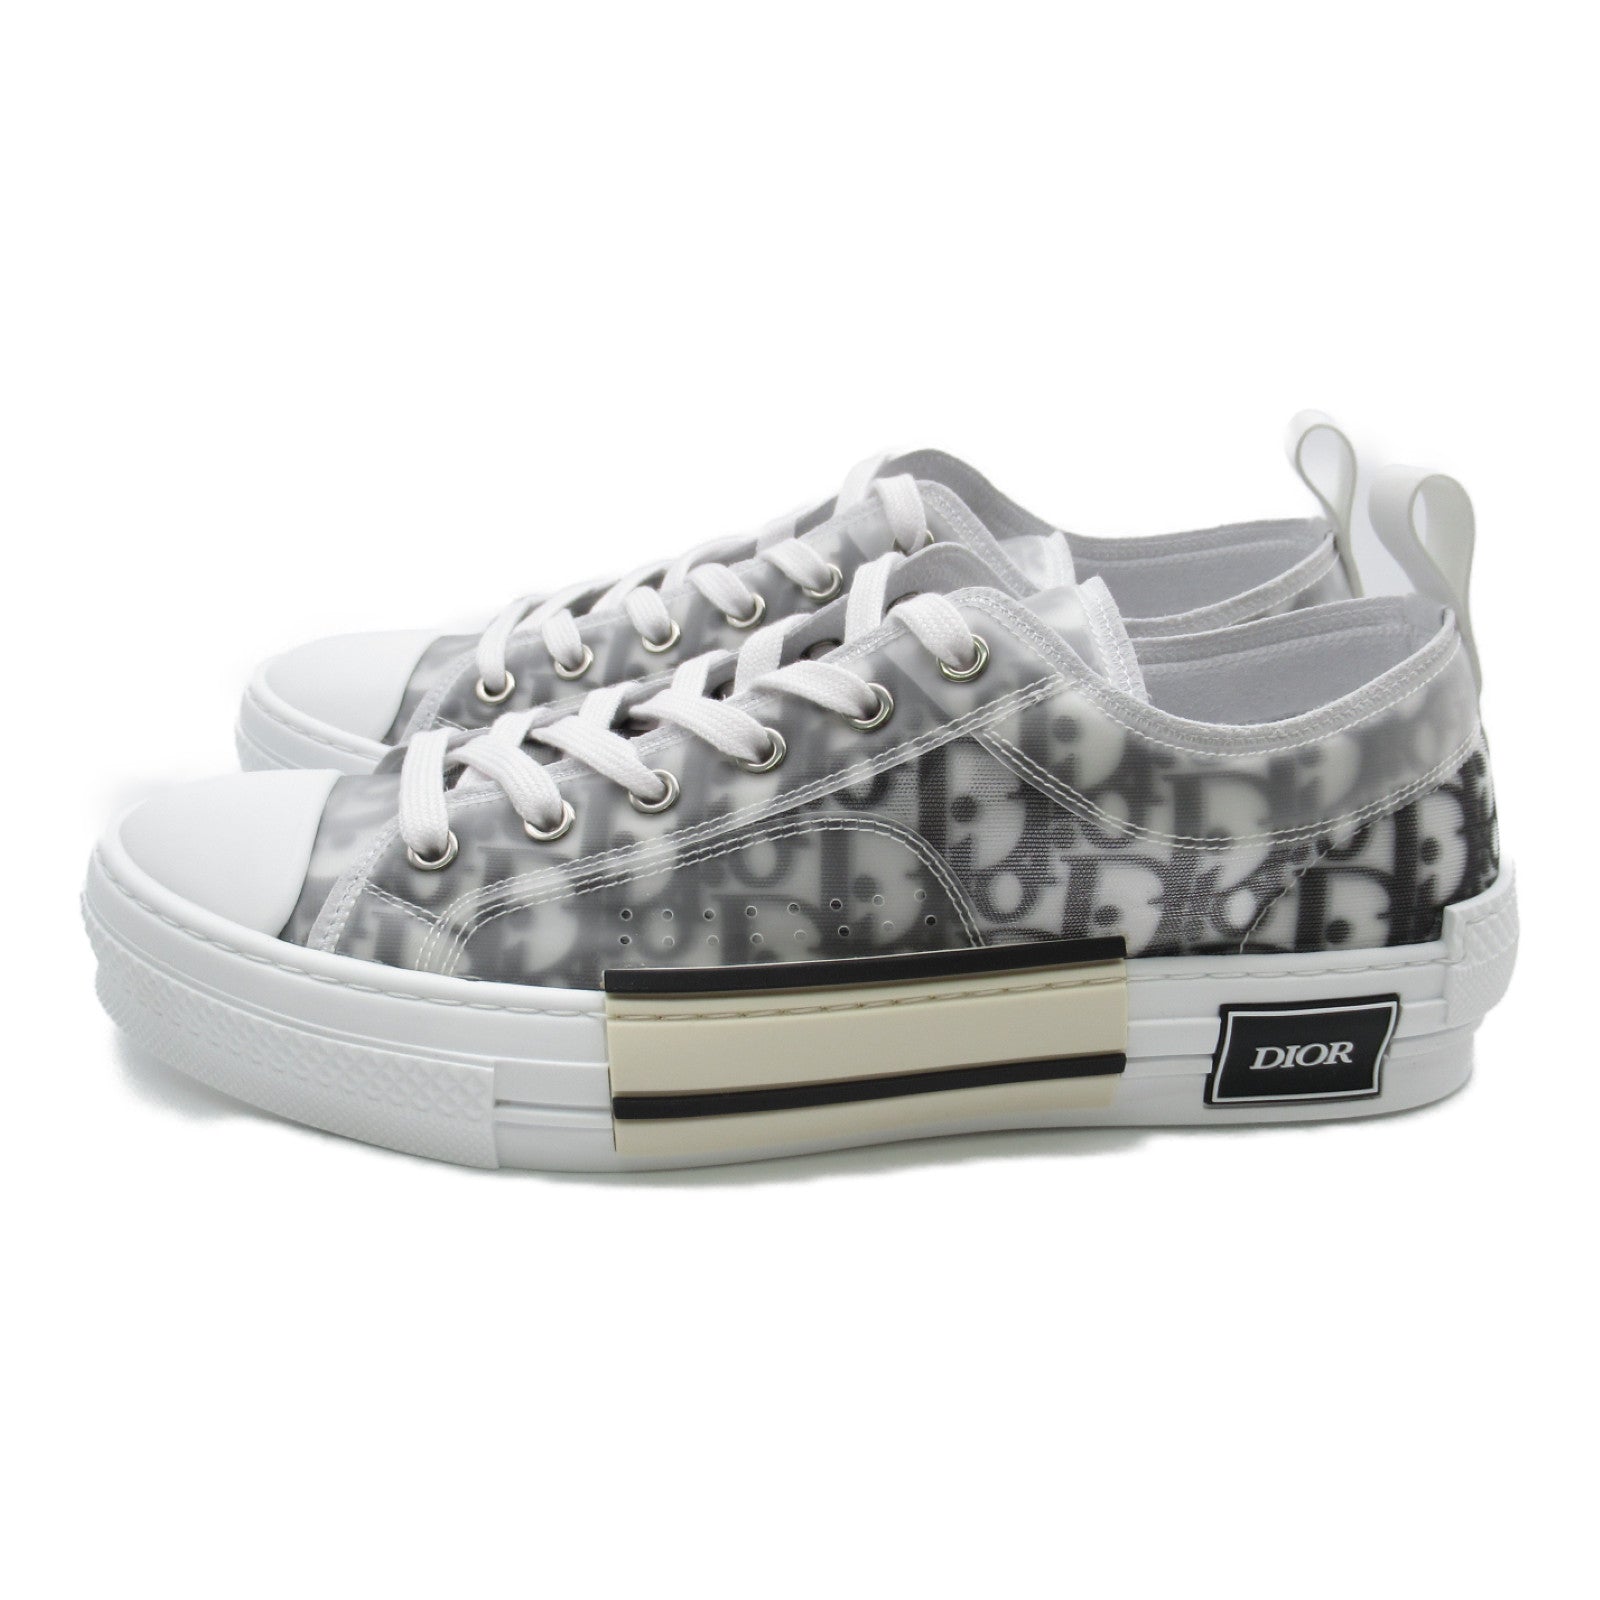 Dior Lock Cut Trainers Shoes  Linen White 3SN249YJP06942